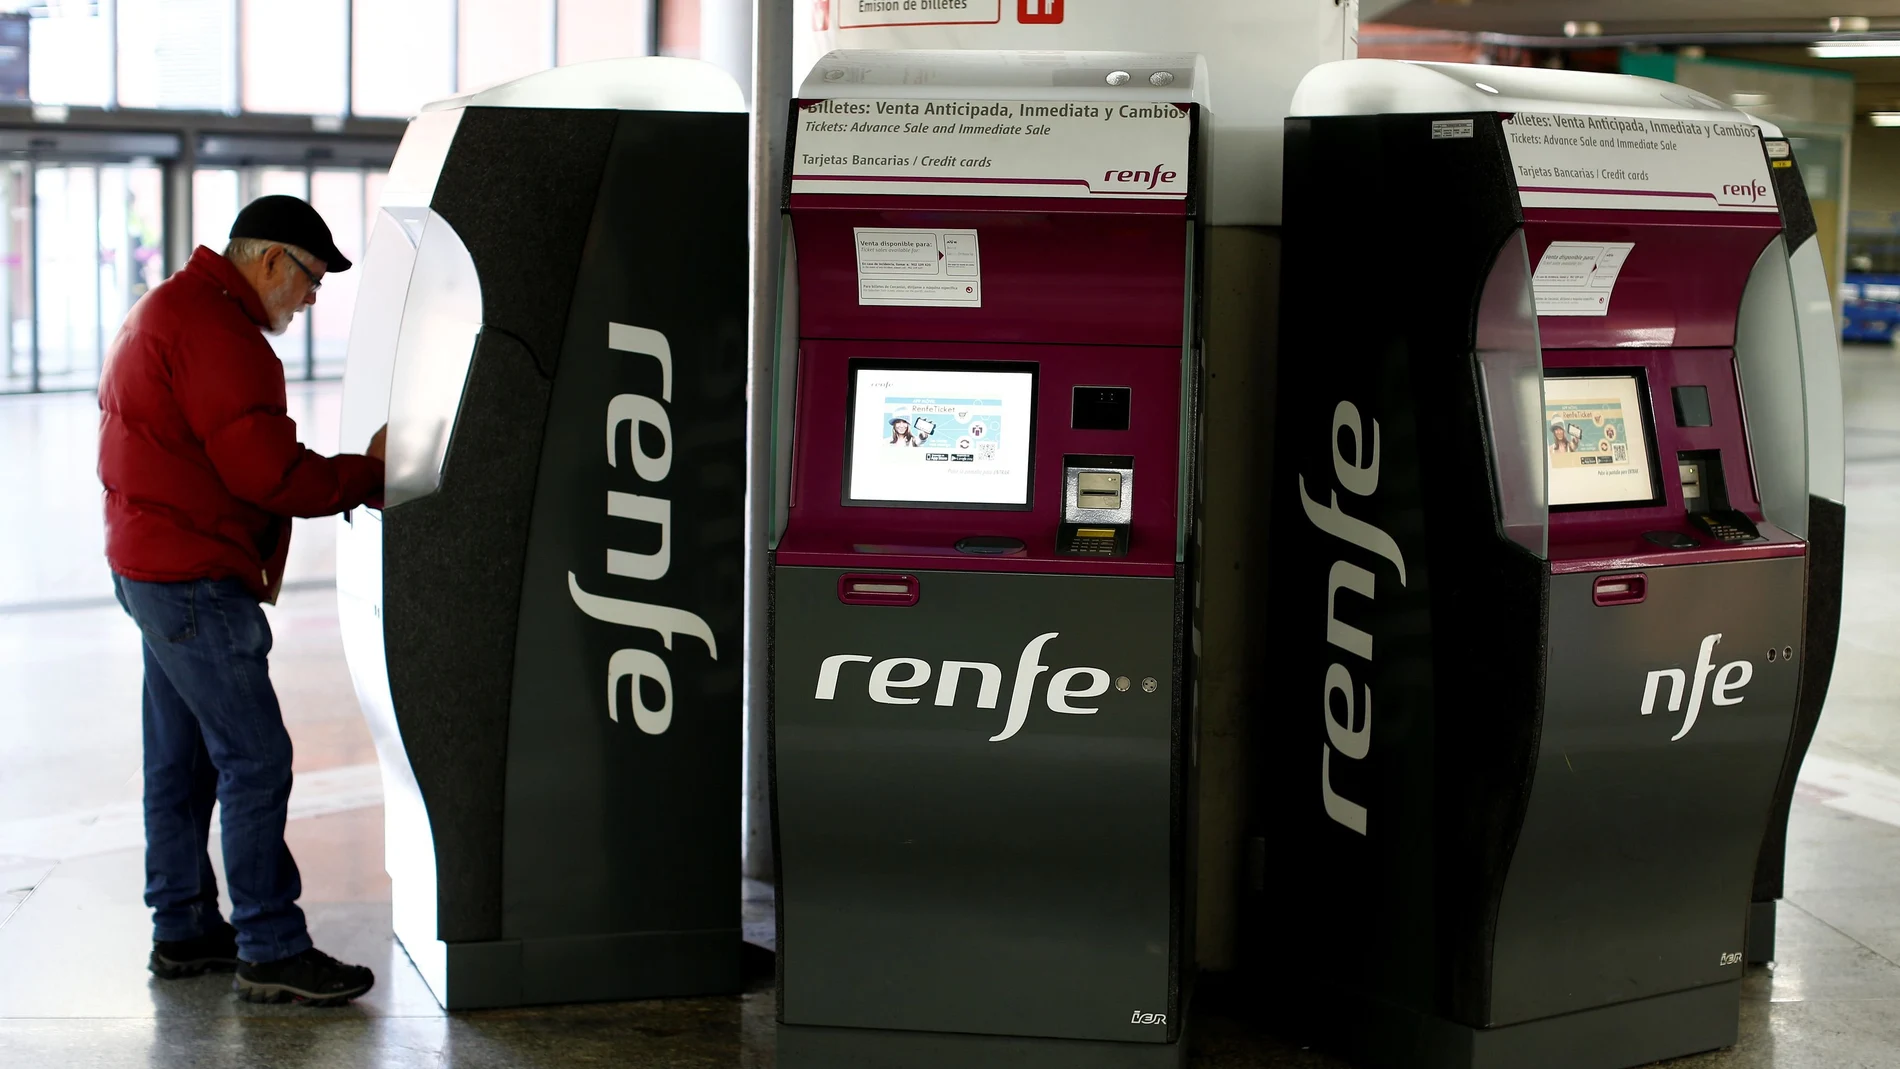 FILE PHOTO: A passenger uses an electronic ticket booth to purchase a Renfe train ticket at the Atocha train station in Madrid